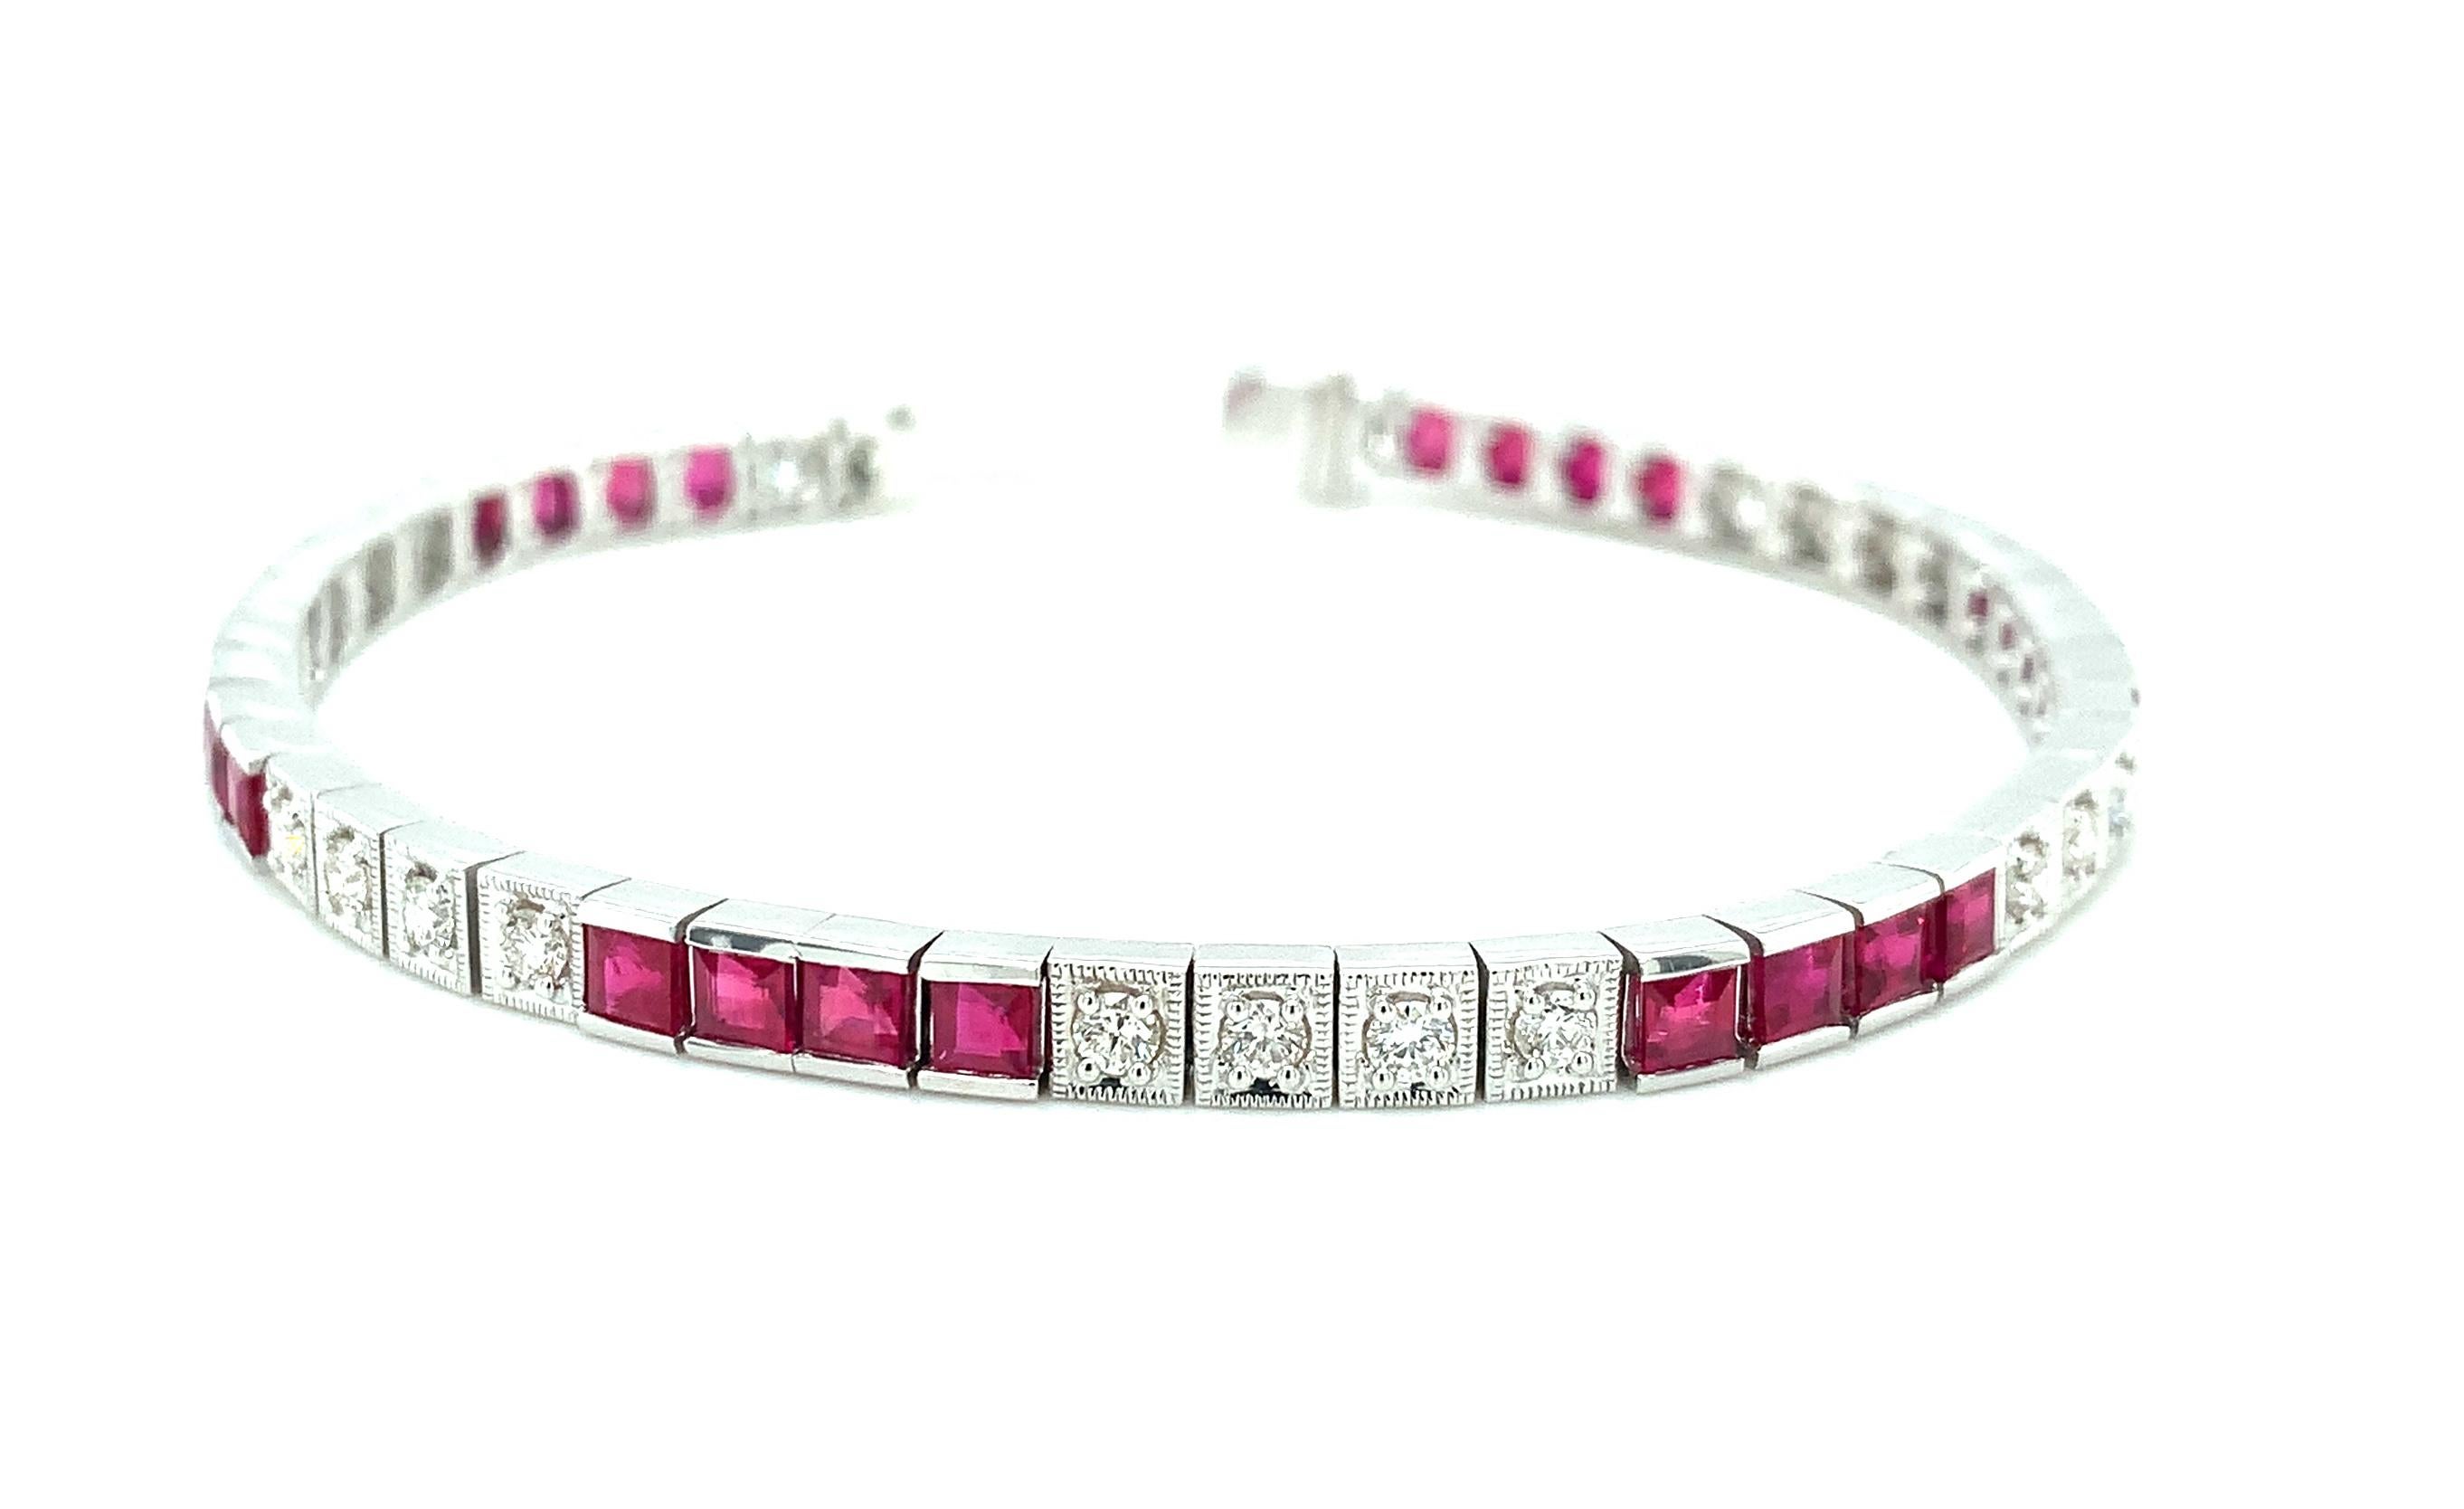 This spectacular ruby and diamond tennis bracelet is set with over four and a half carats of the finest Burmese rubies and over a carat of white diamonds! Burma (Myanmar) is the source of some of the highest quality gems available, known for their